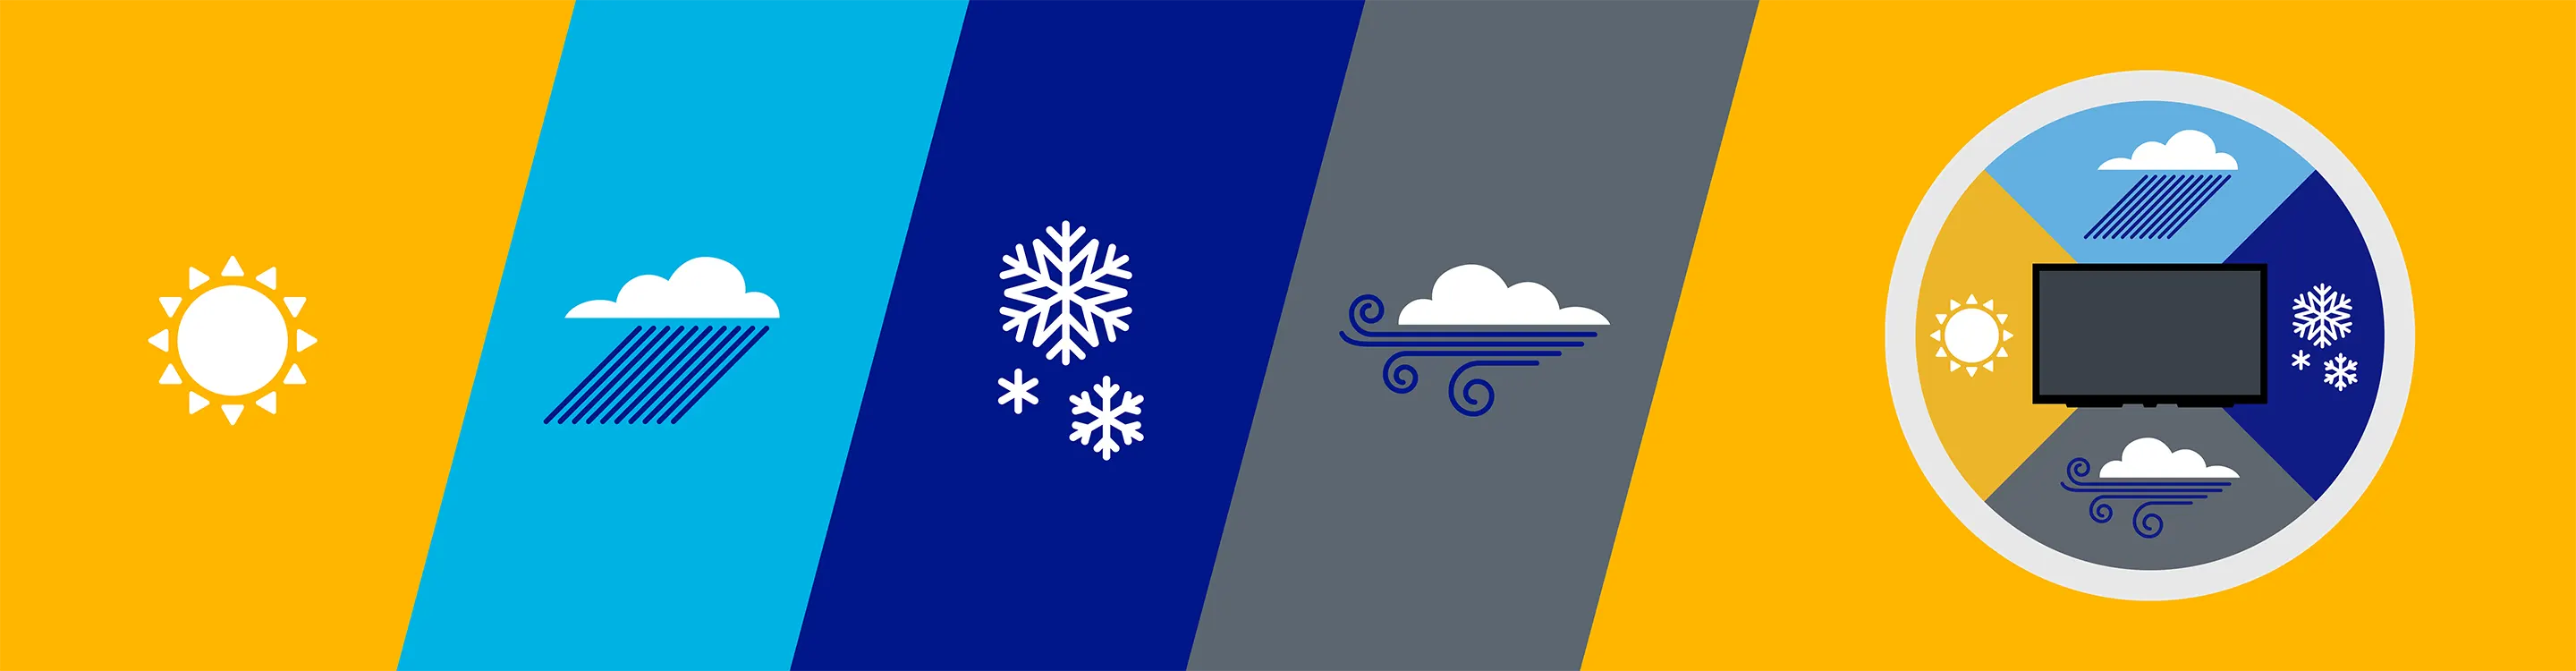 A banner showing weather elements